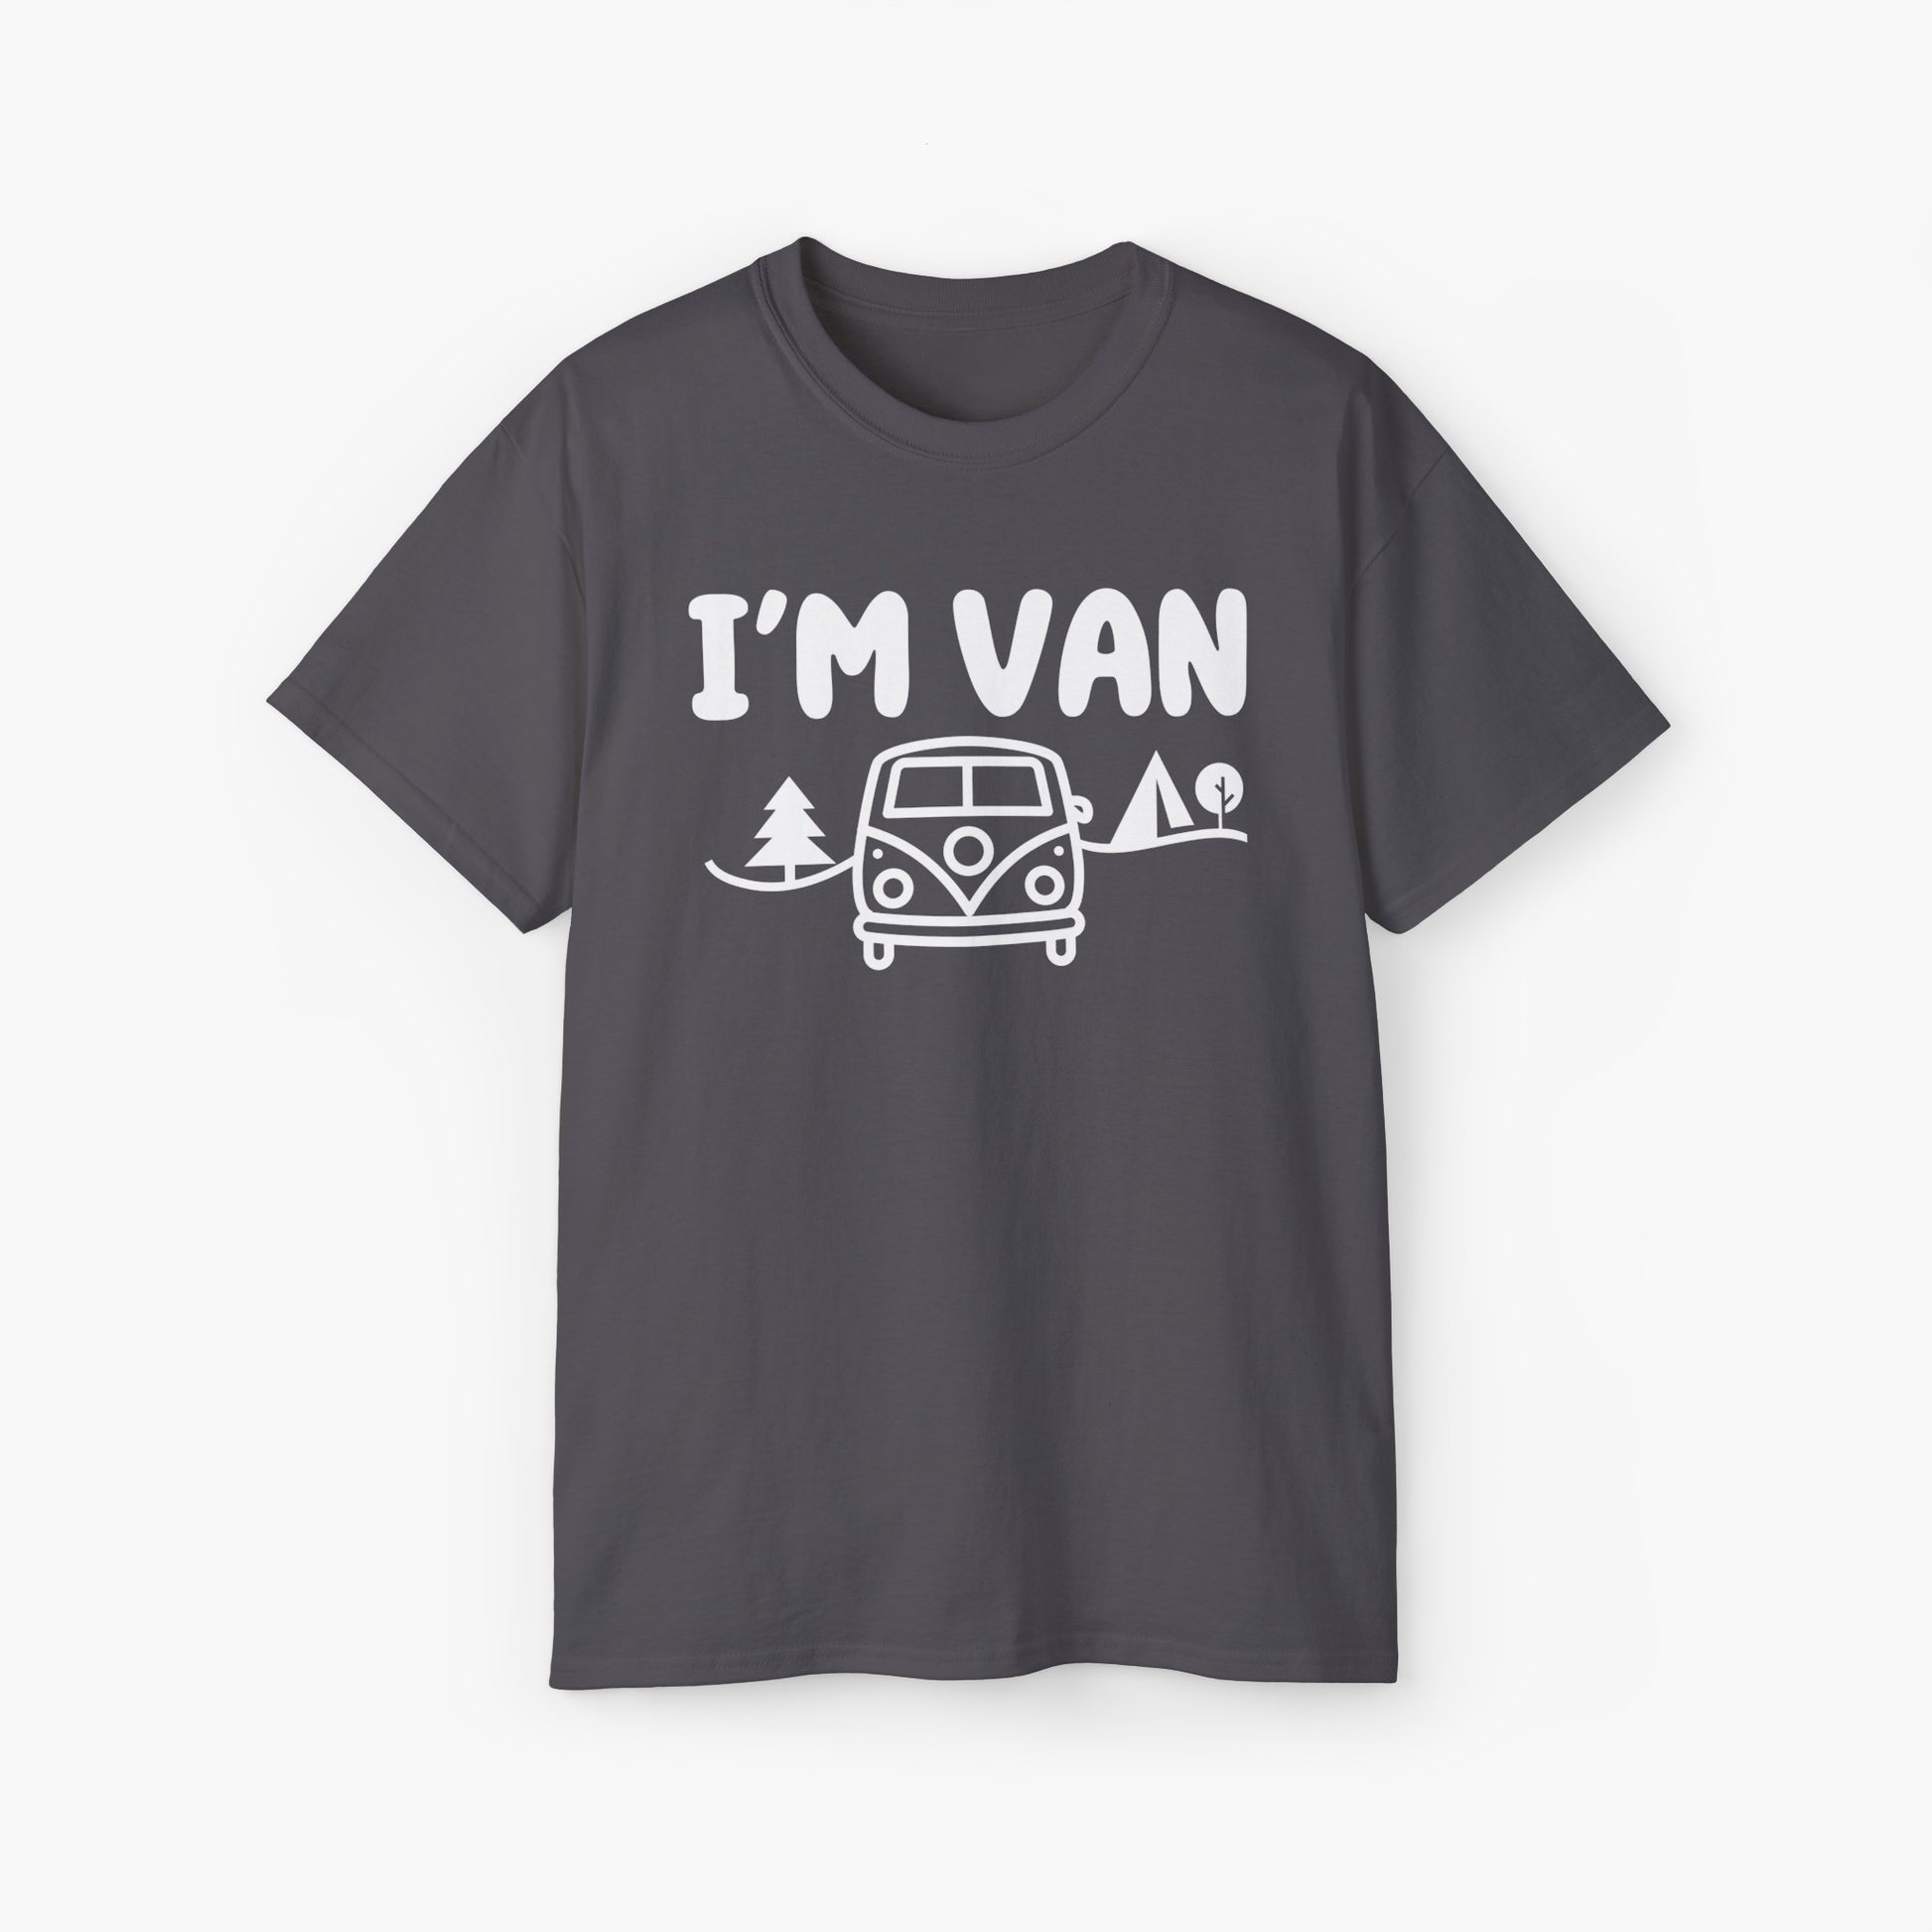 DArk grey t-shirt with the text 'I'm Van' featuring a graphic of a van surrounded by trees on a plain background.